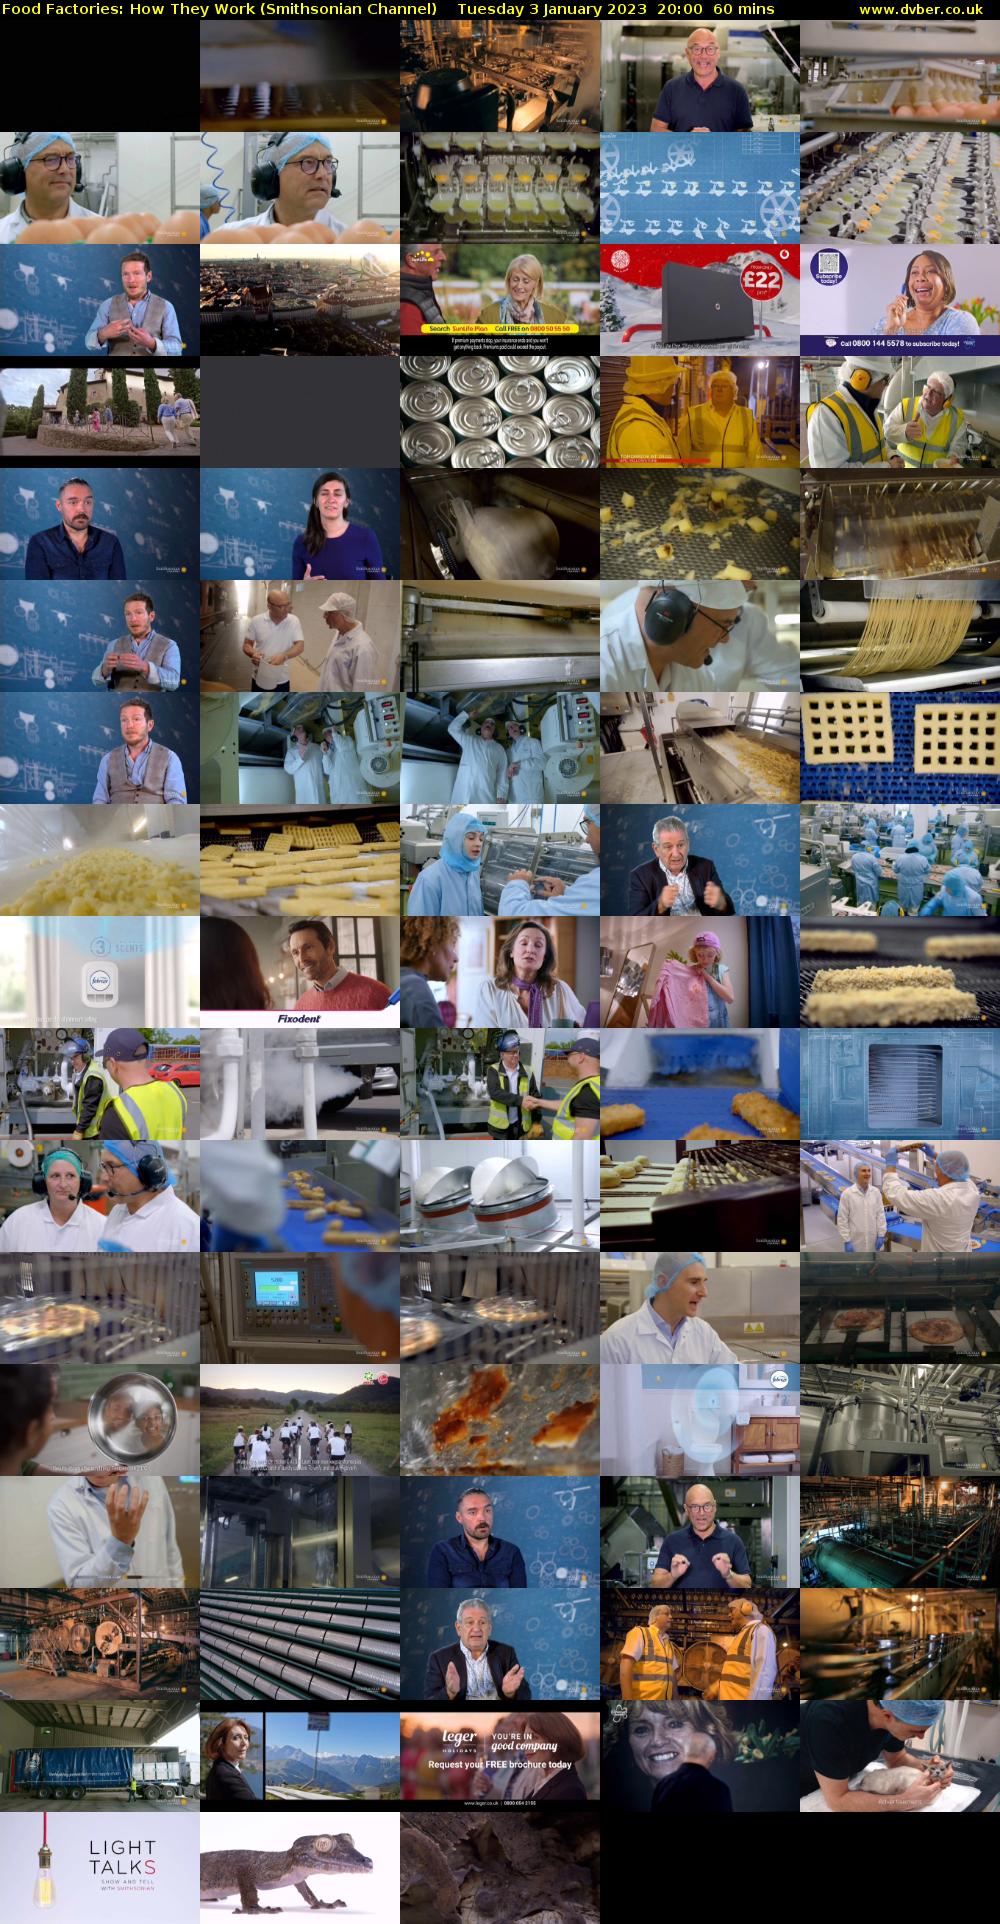 Food Factories: How They Work (Smithsonian Channel) Tuesday 3 January 2023 20:00 - 21:00